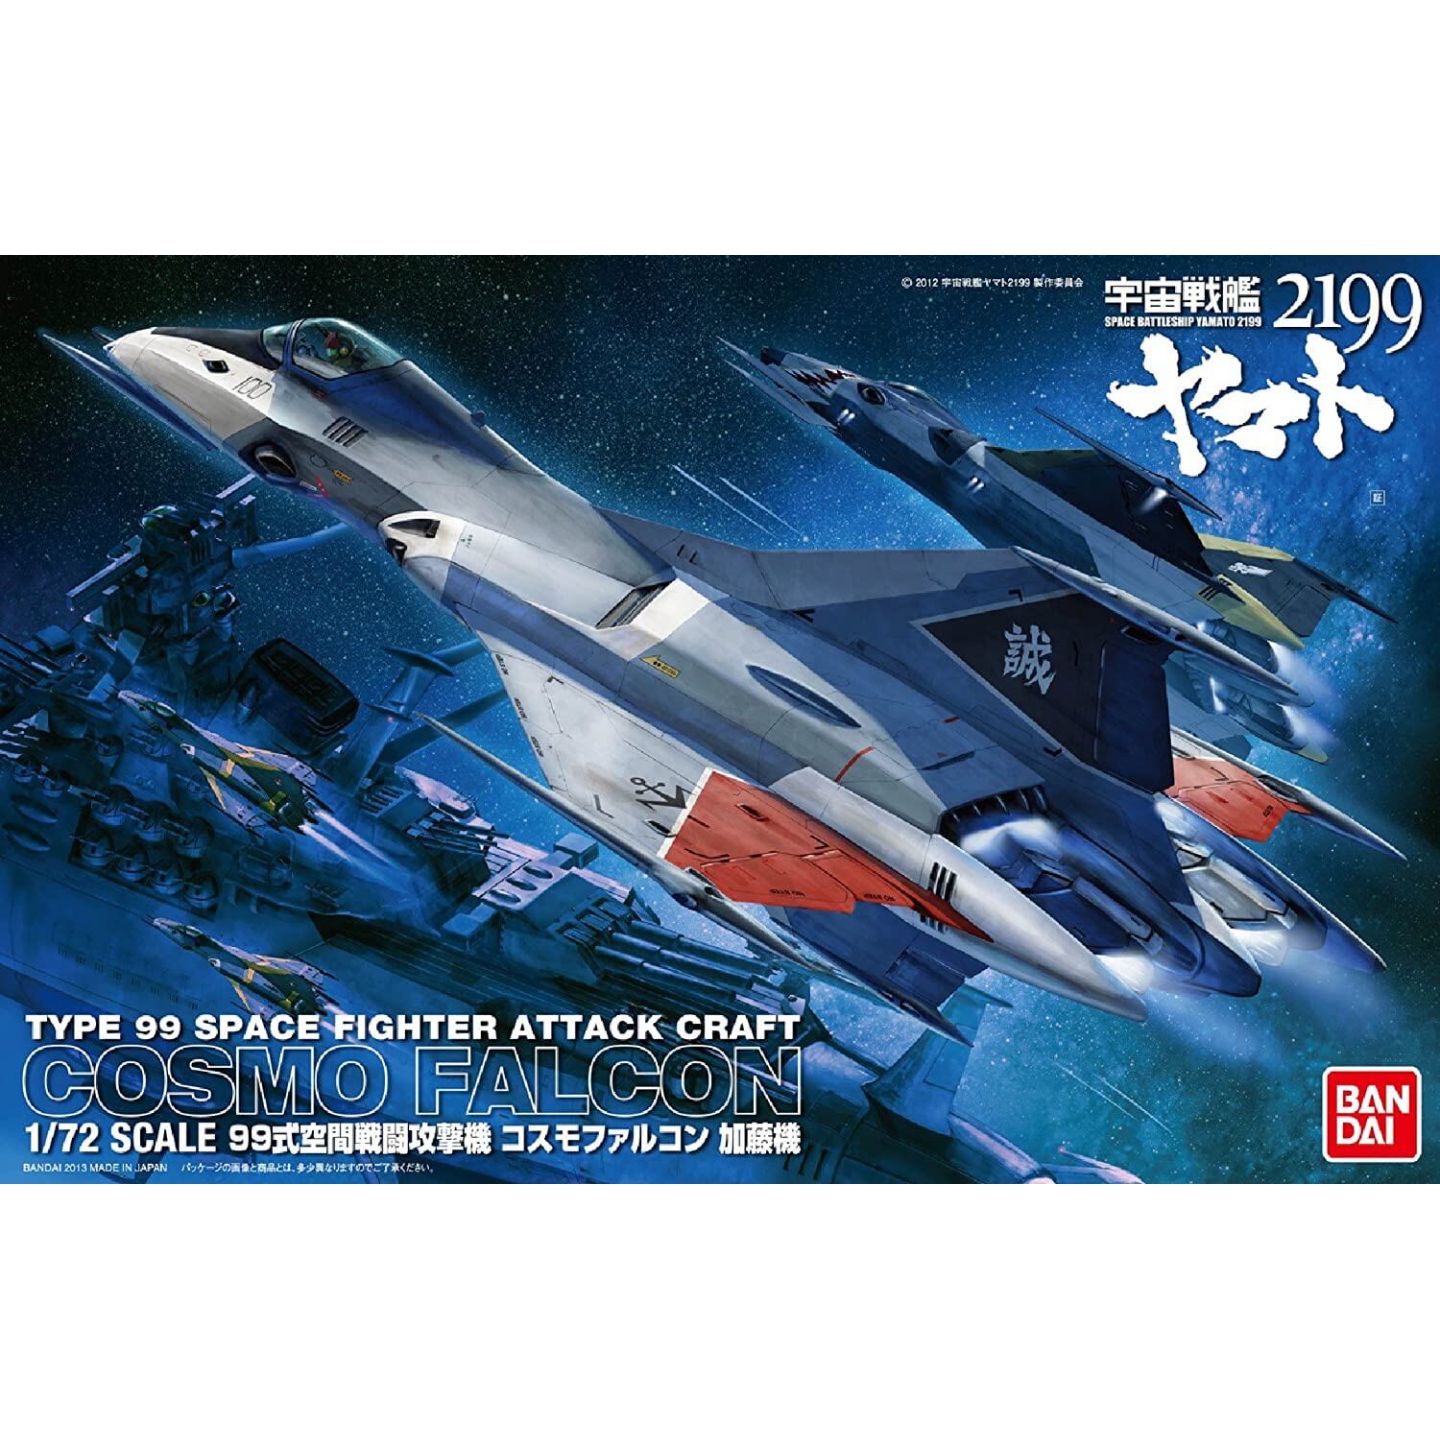 Yamato 2199 Type 99 Space Fighter Attack Craft Cosmo Falcon Bandai 1/72 Japan 